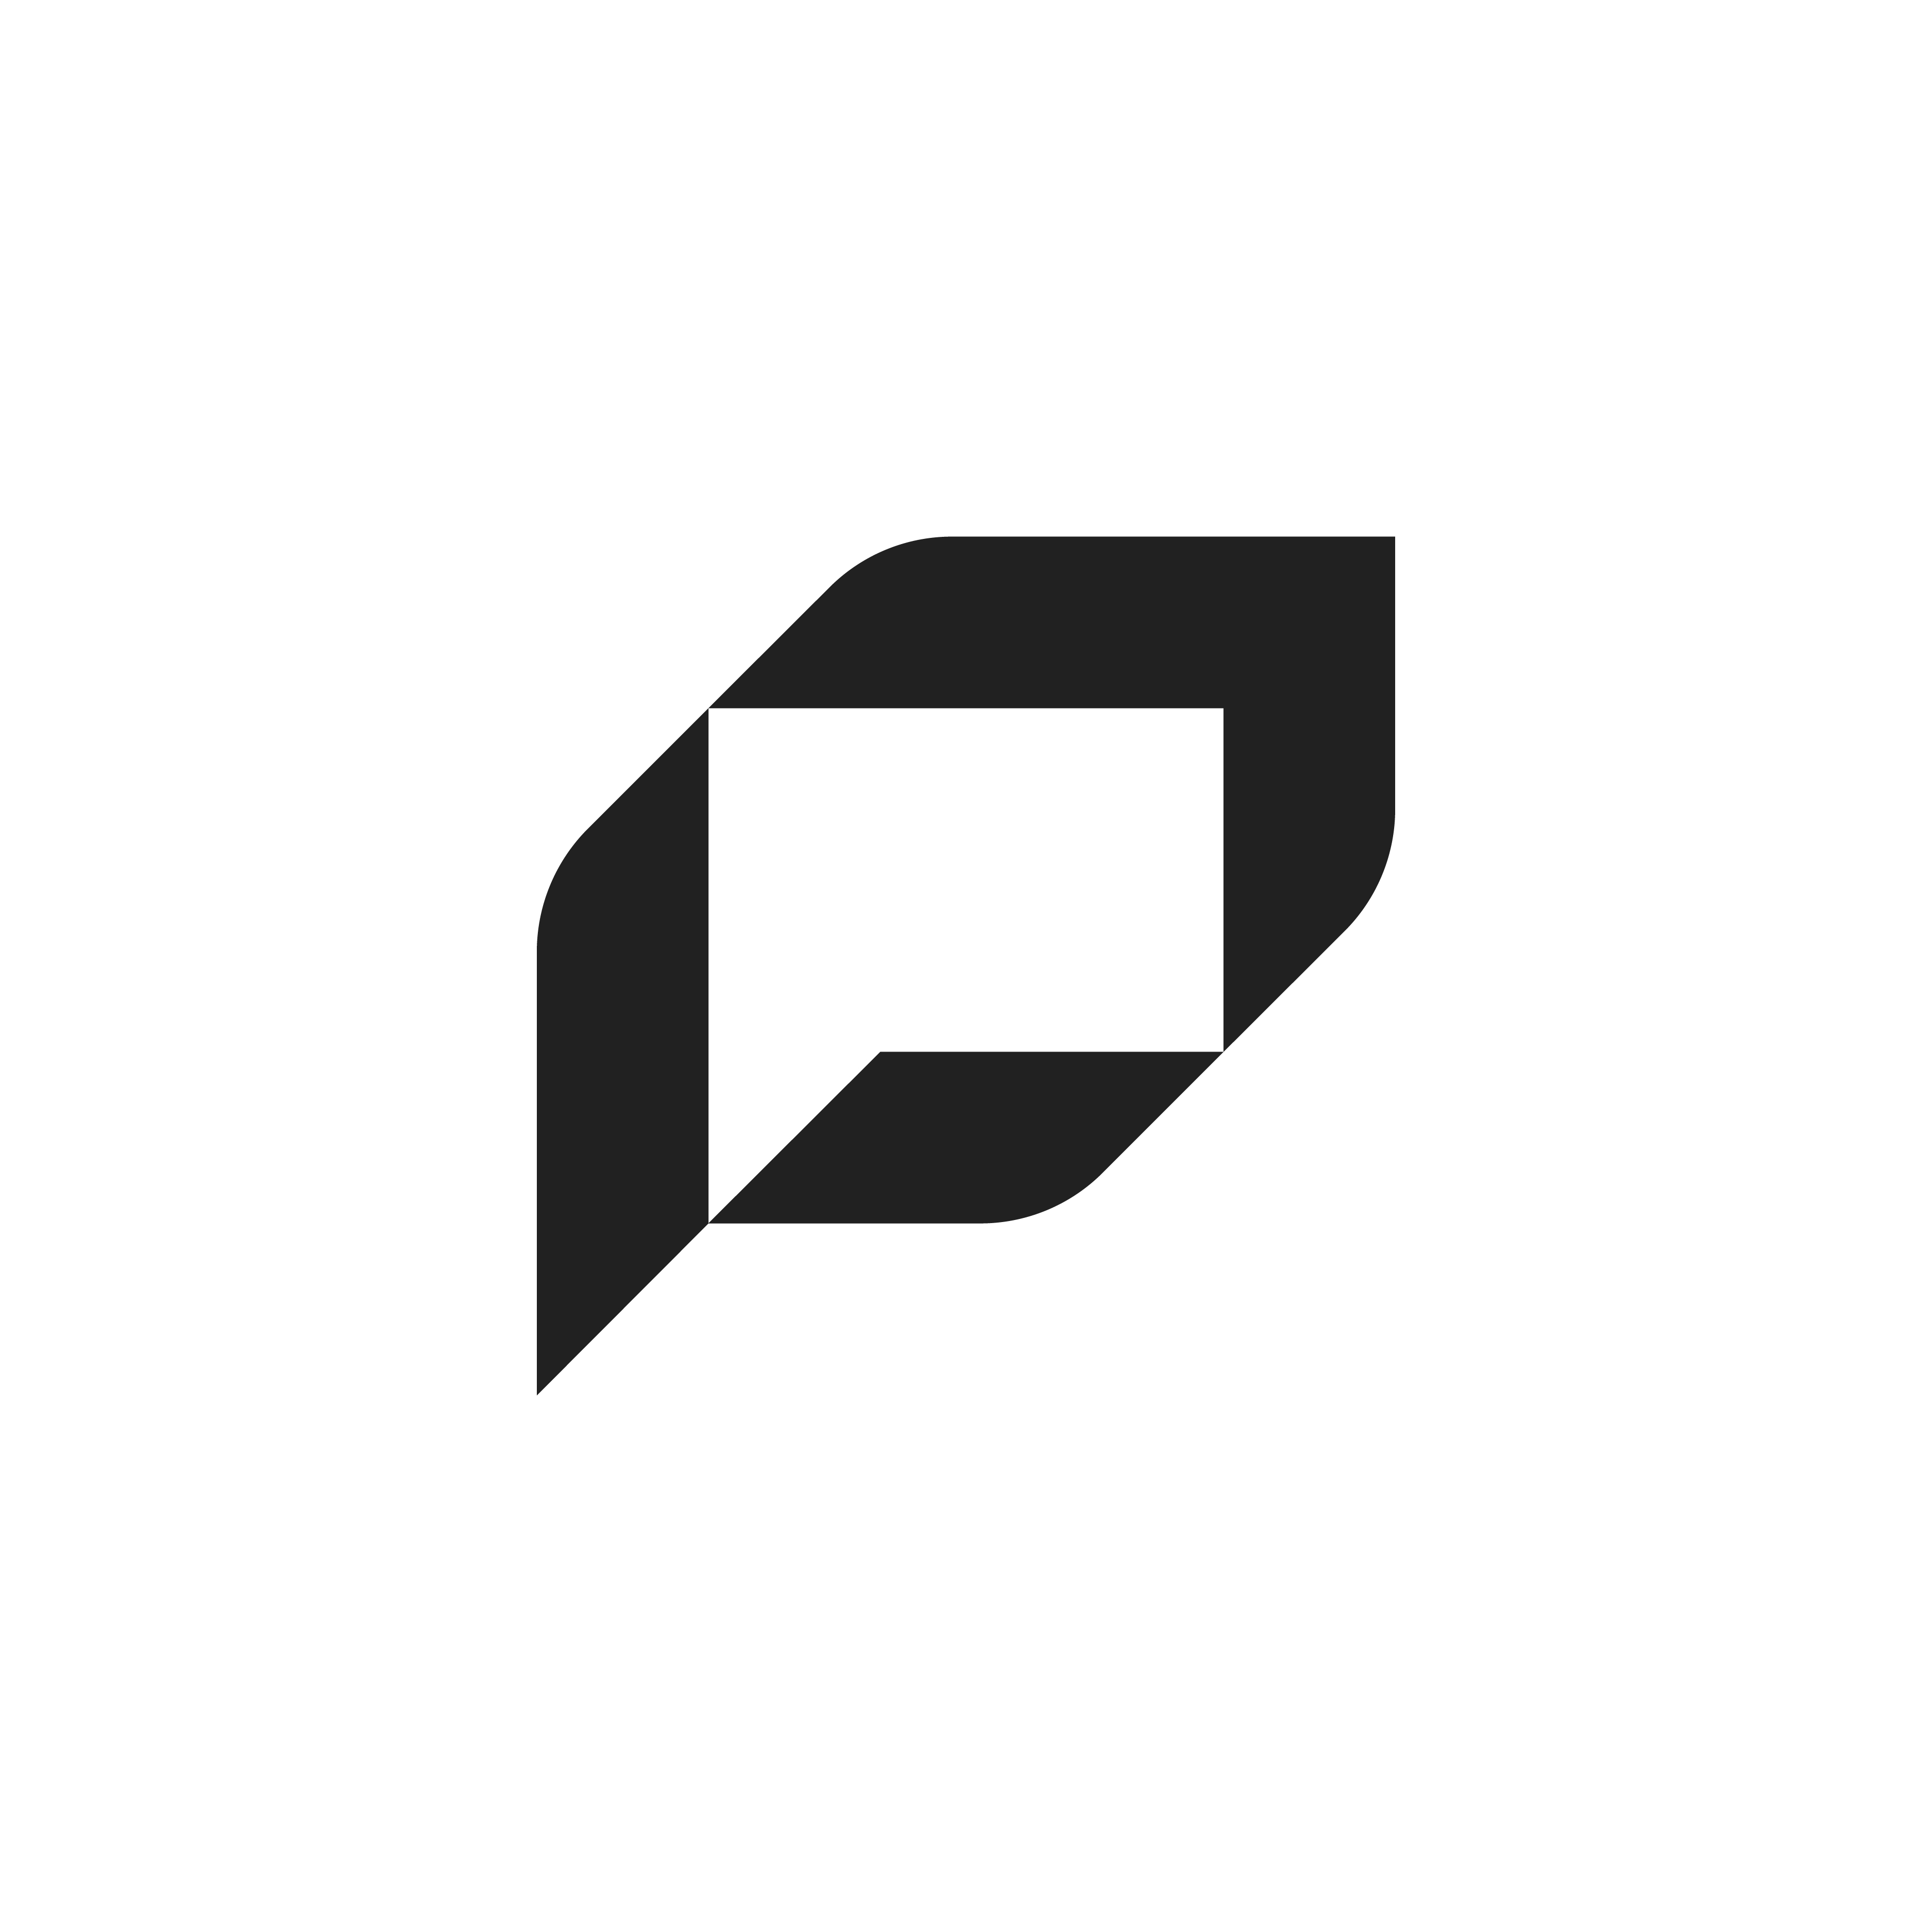 Letter P logo design by logo designer Francesco Bonetti for your inspiration and for the worlds largest logo competition